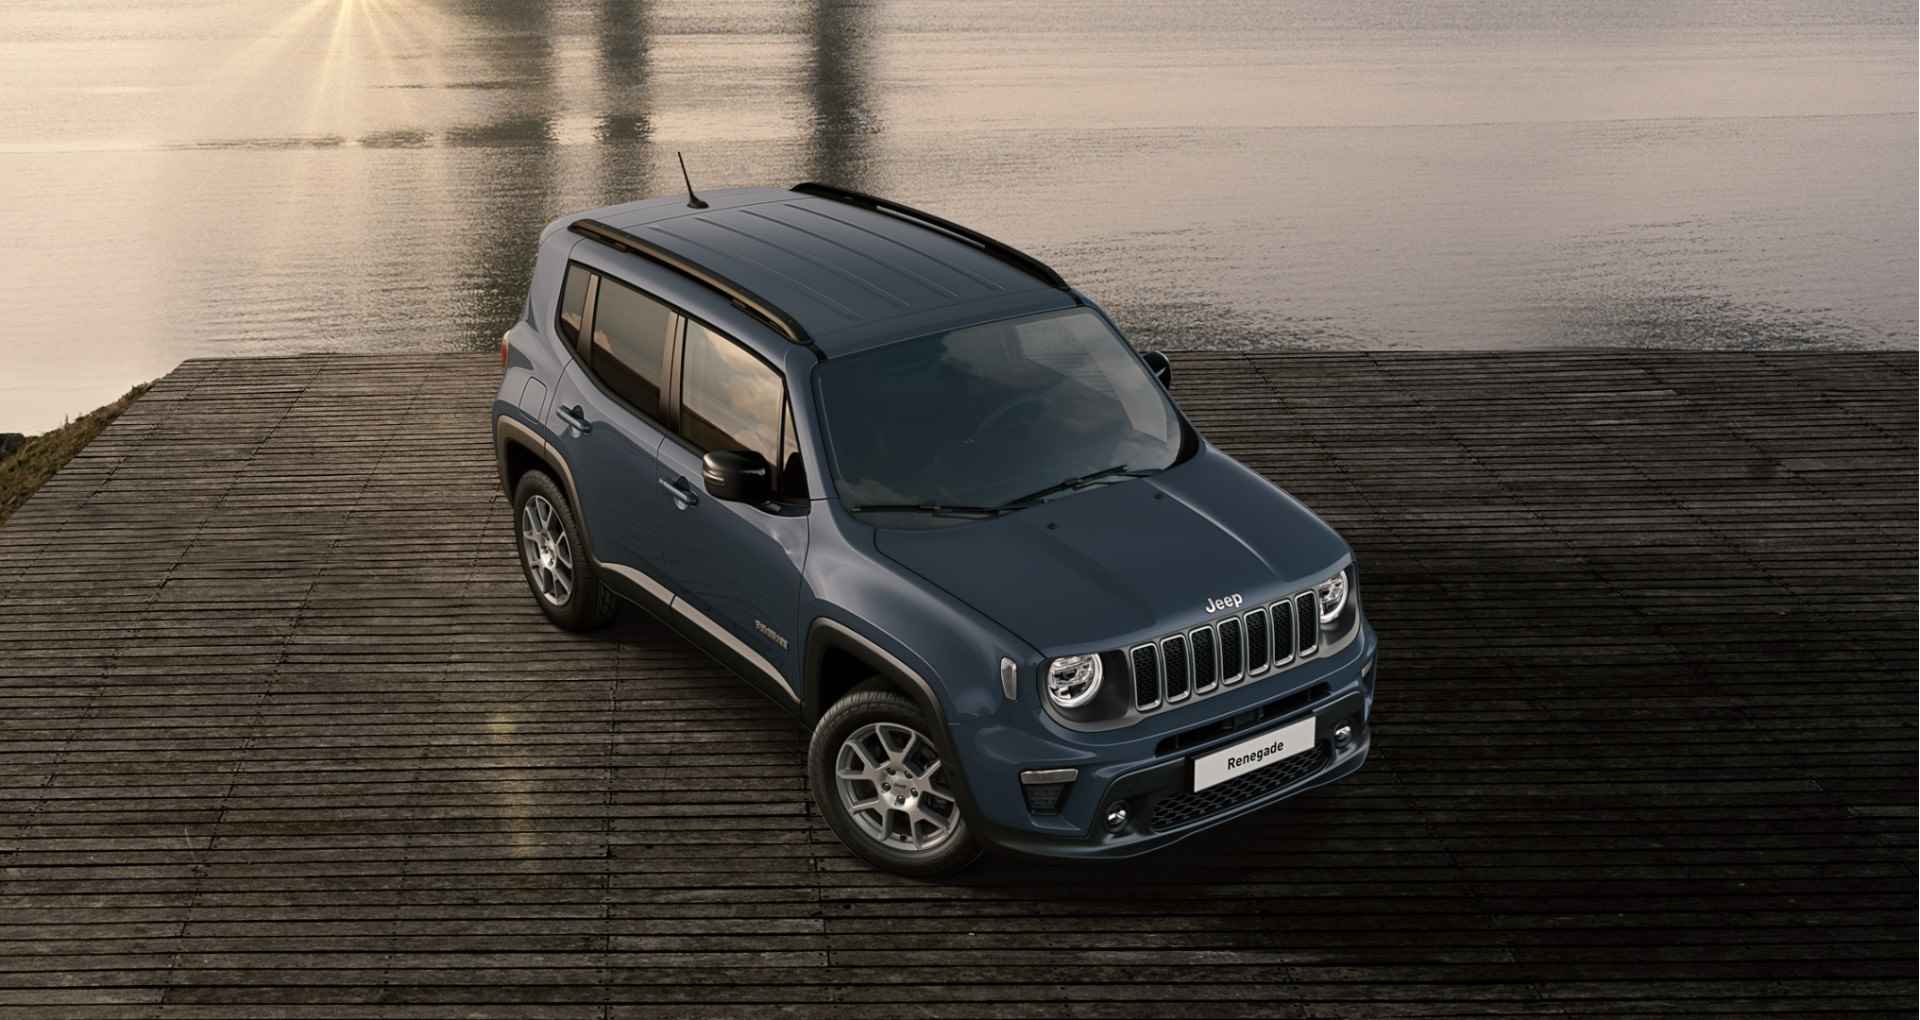 Jeep Renegade 1.5T 130 pk Automaat e-Hybrid Limited Convenience Pack | Style Pack |  Visibility Pack | Uconnect™ LIVE-infotainmentsysteem met 8,4-inch Touchscreen, Navigatie en Bluetooth - 5/9